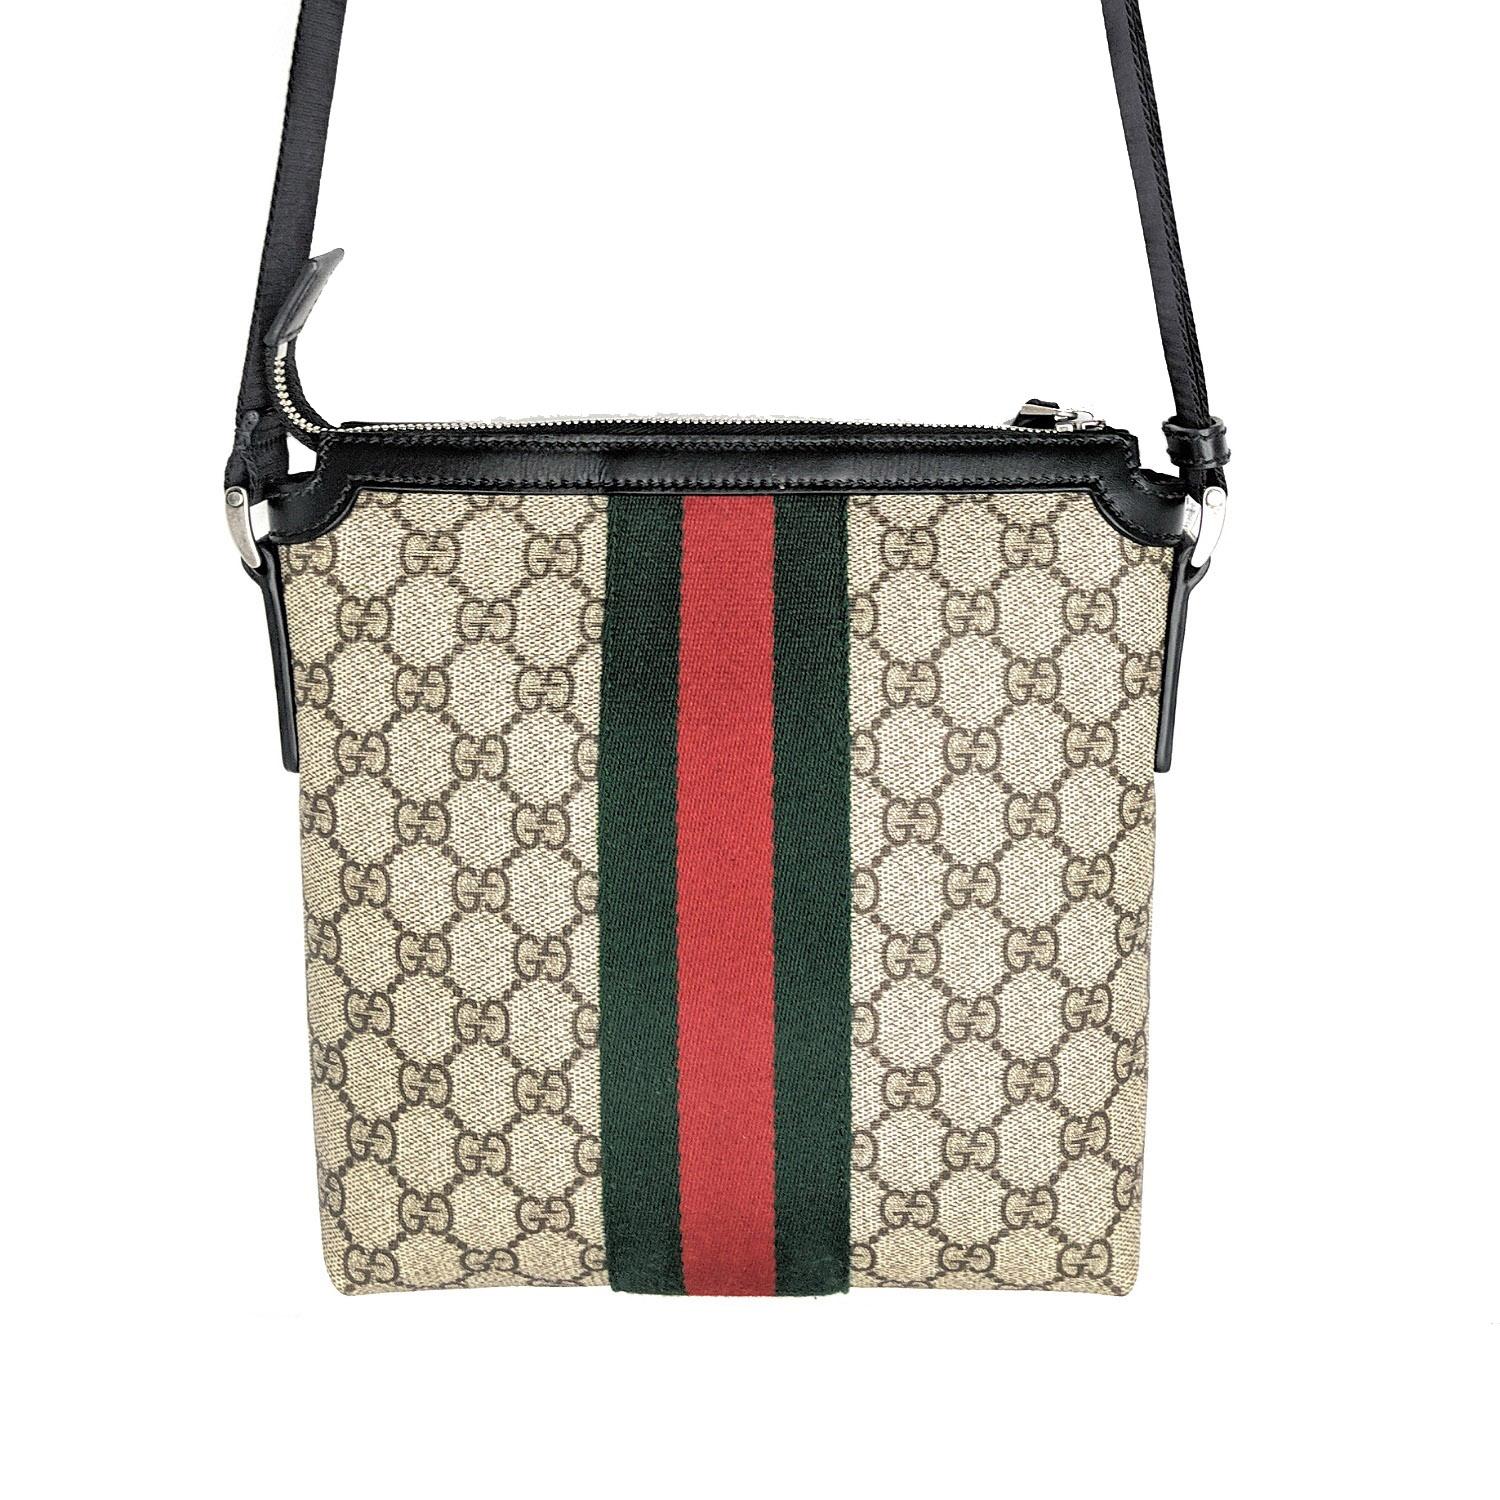 Coated canvas messenger bag in beige featuring logo pattern printed in brown. Buffed black leather trim throughout. Adjustable shoulder strap in black with leather strap pad. Leather logo appliqué at face. Signature striped web trim in green and red